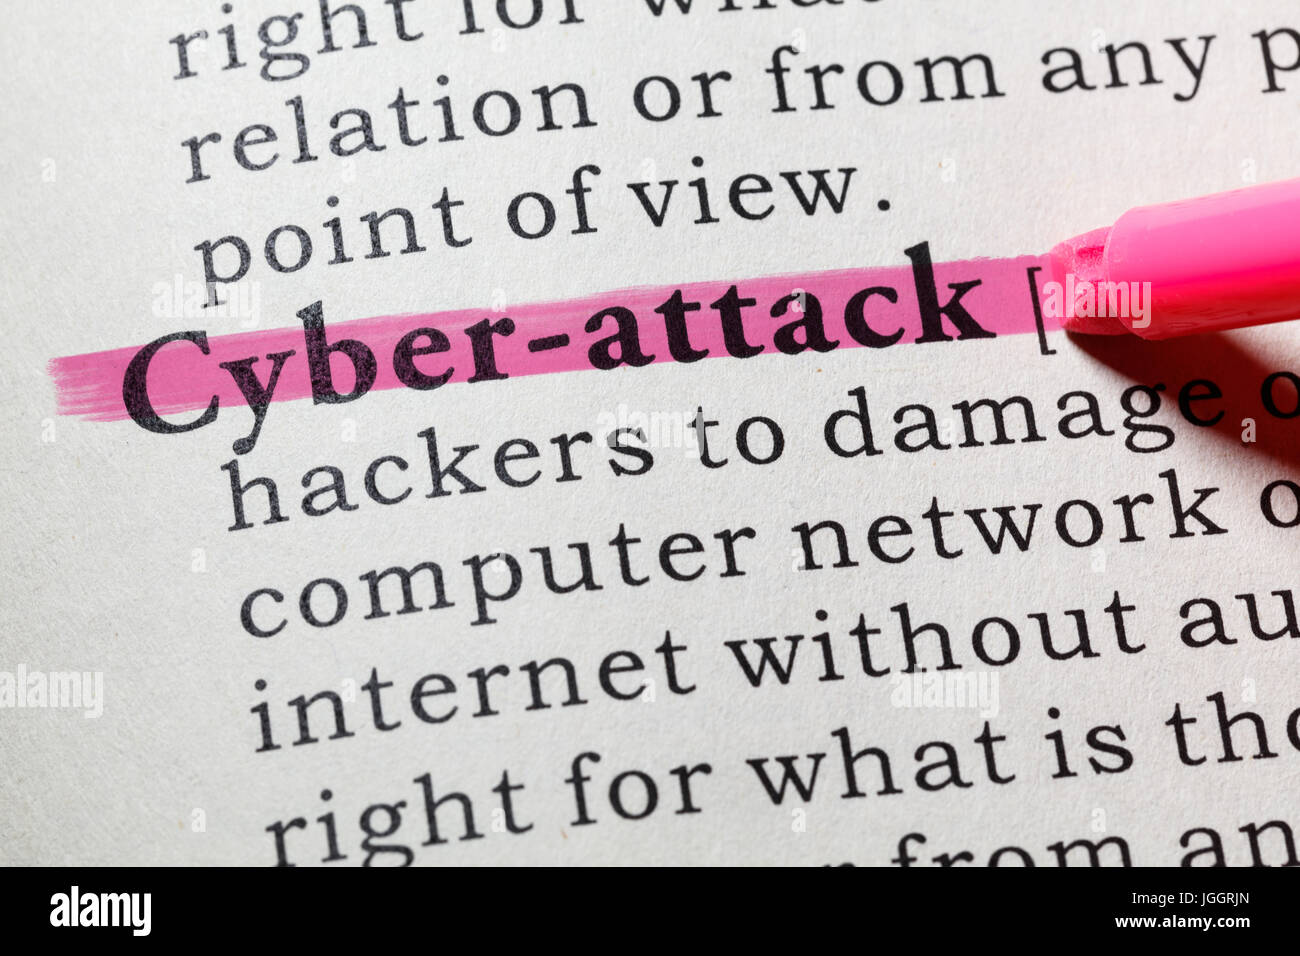 Fake Dictionary, Dictionary definition of the word cyber-attack. including key descriptive words. Stock Photo